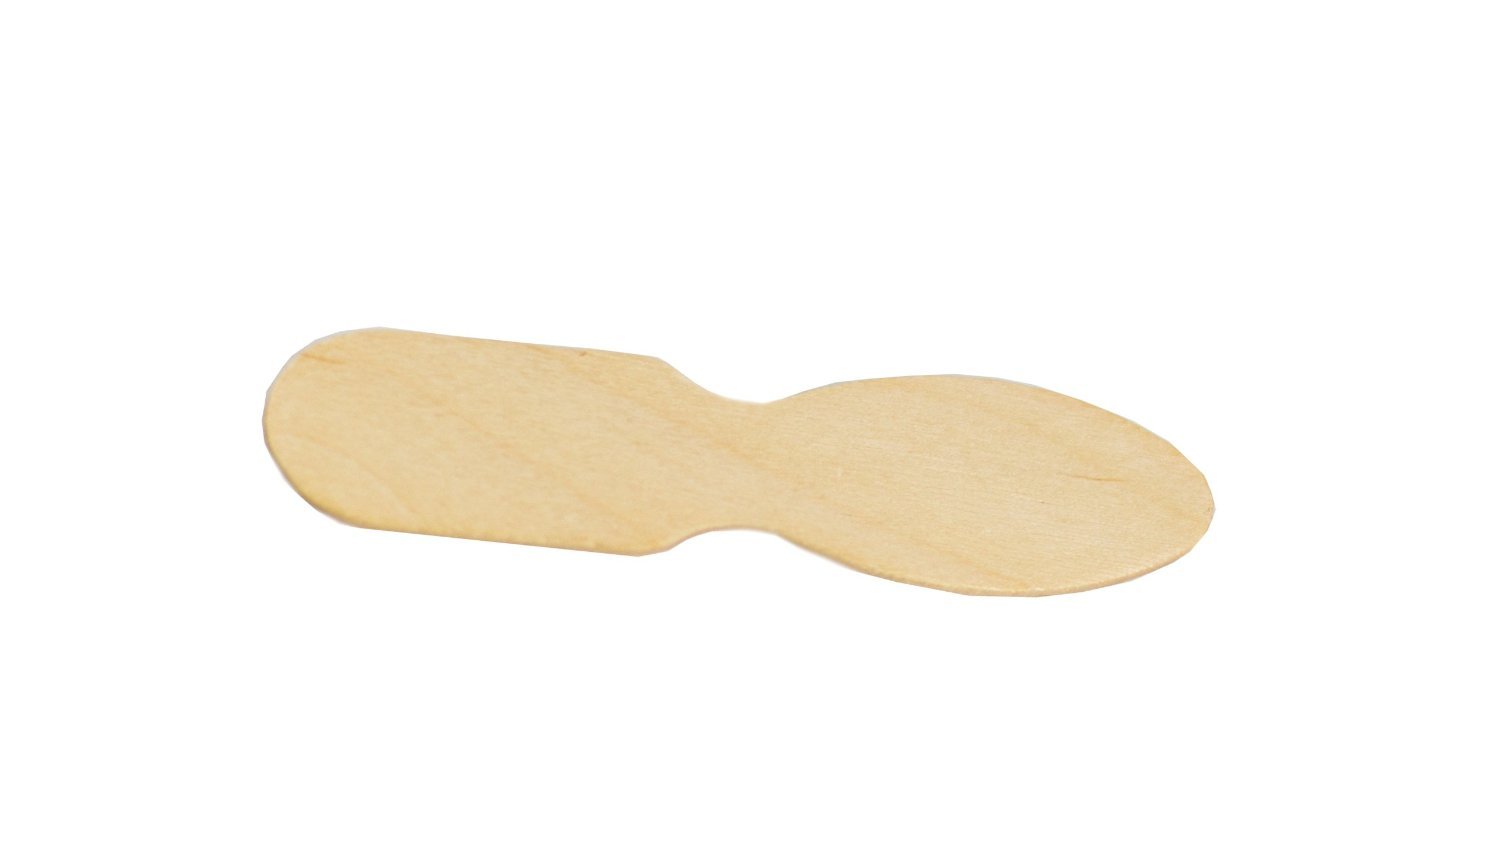 Perfect Stix Wooden Craft Stick/Plain Taster Ice Cream Paddle Spoon, Paper Wrapped, 3